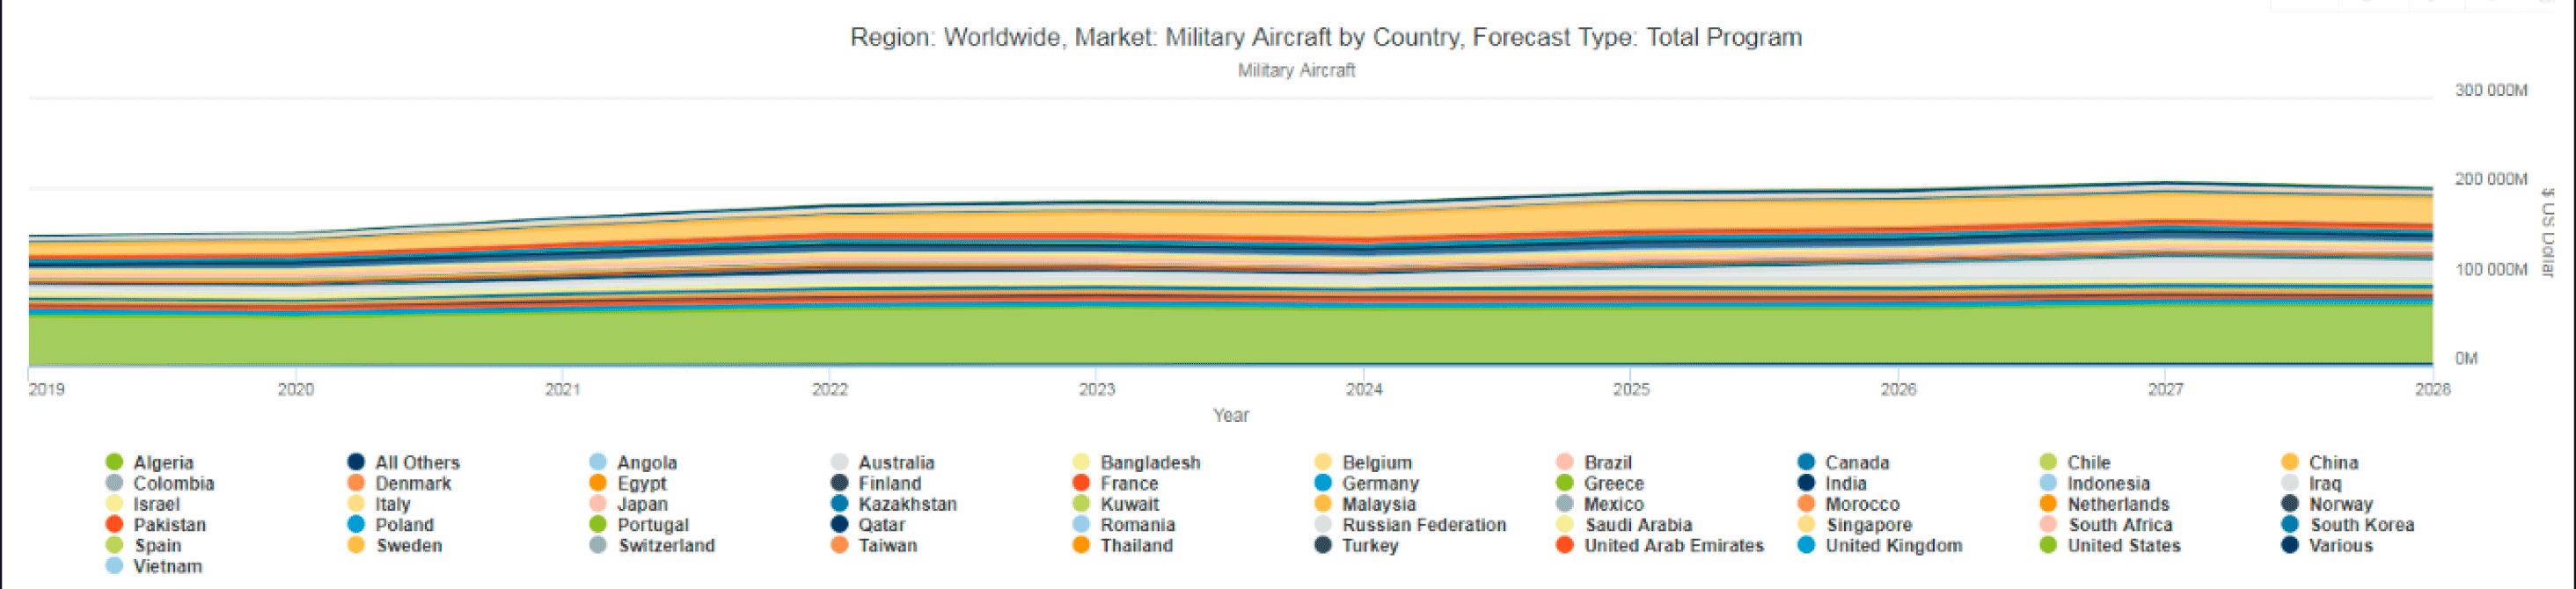 image of markets forecast military aircraft by country